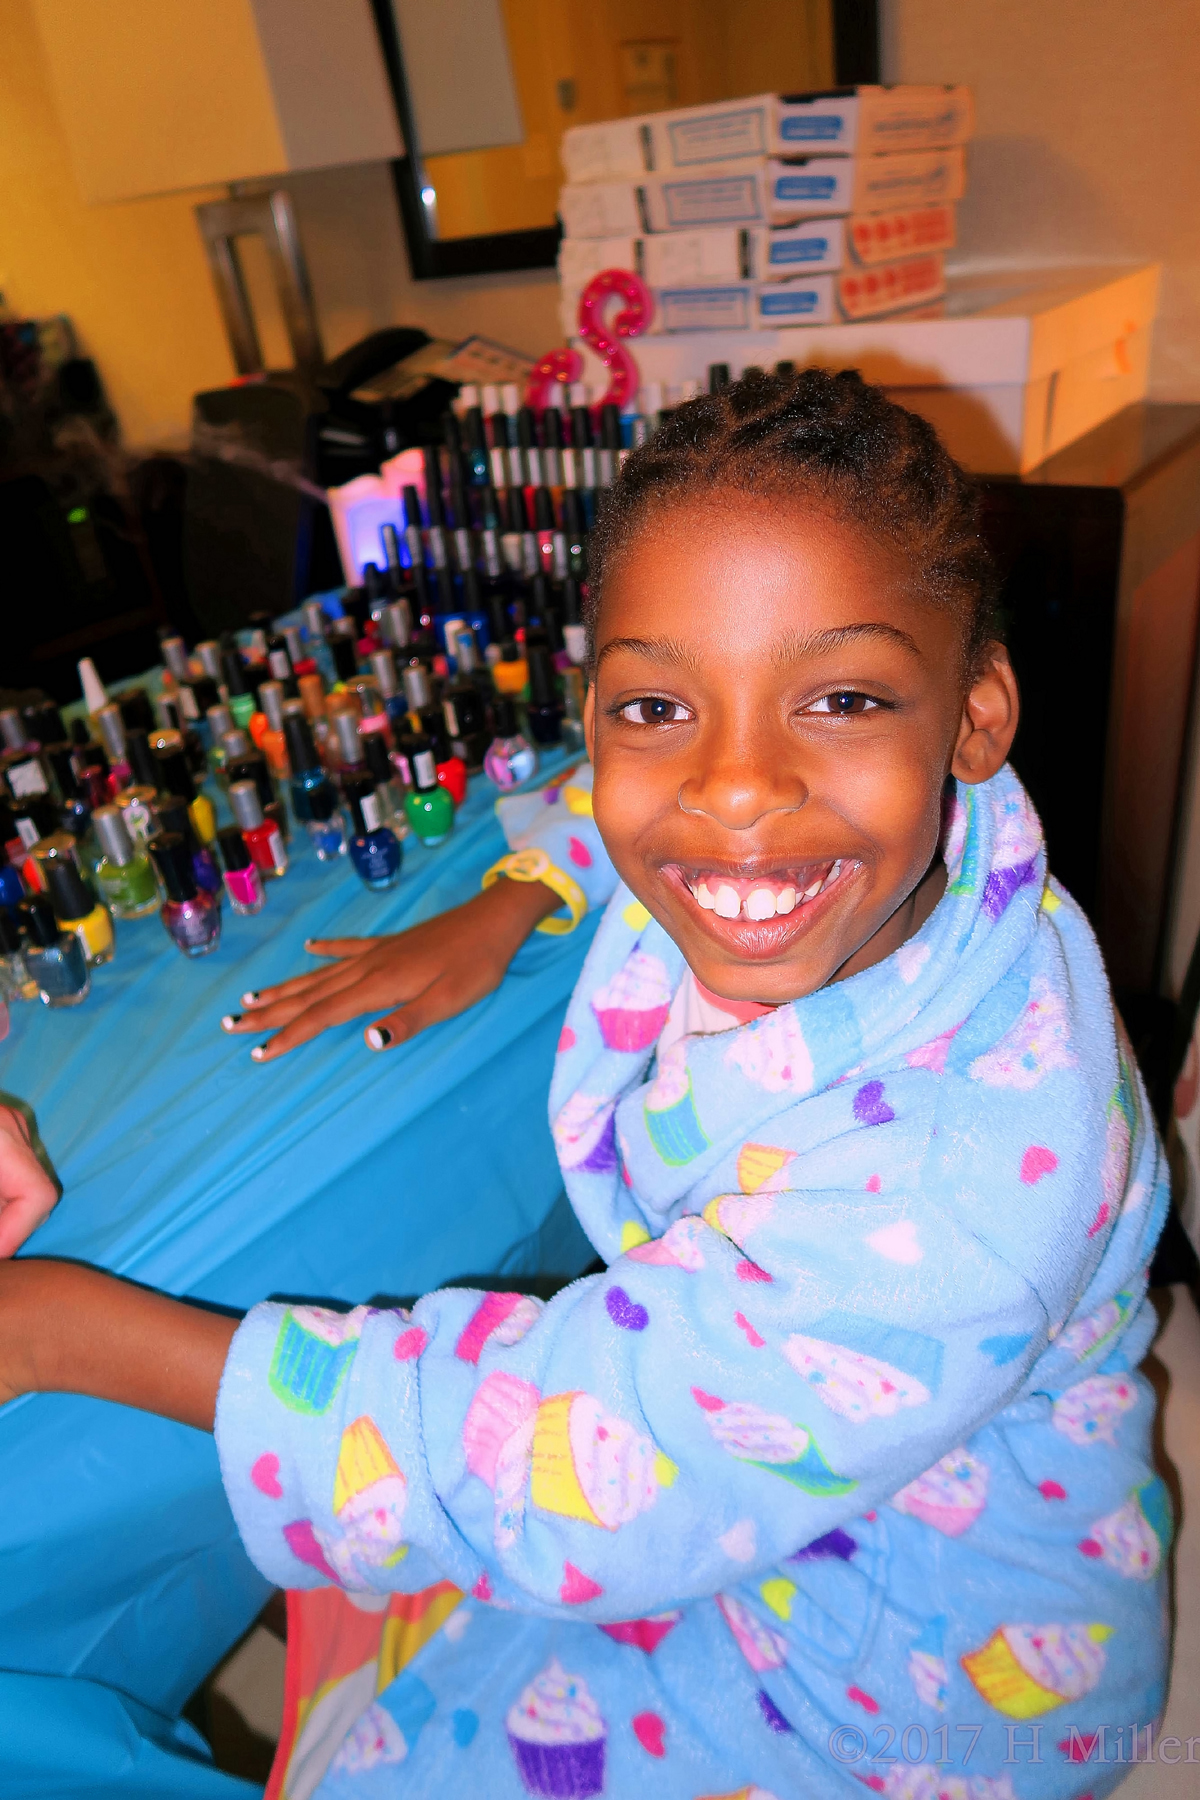 Smiling During Her Kids Manicure! 